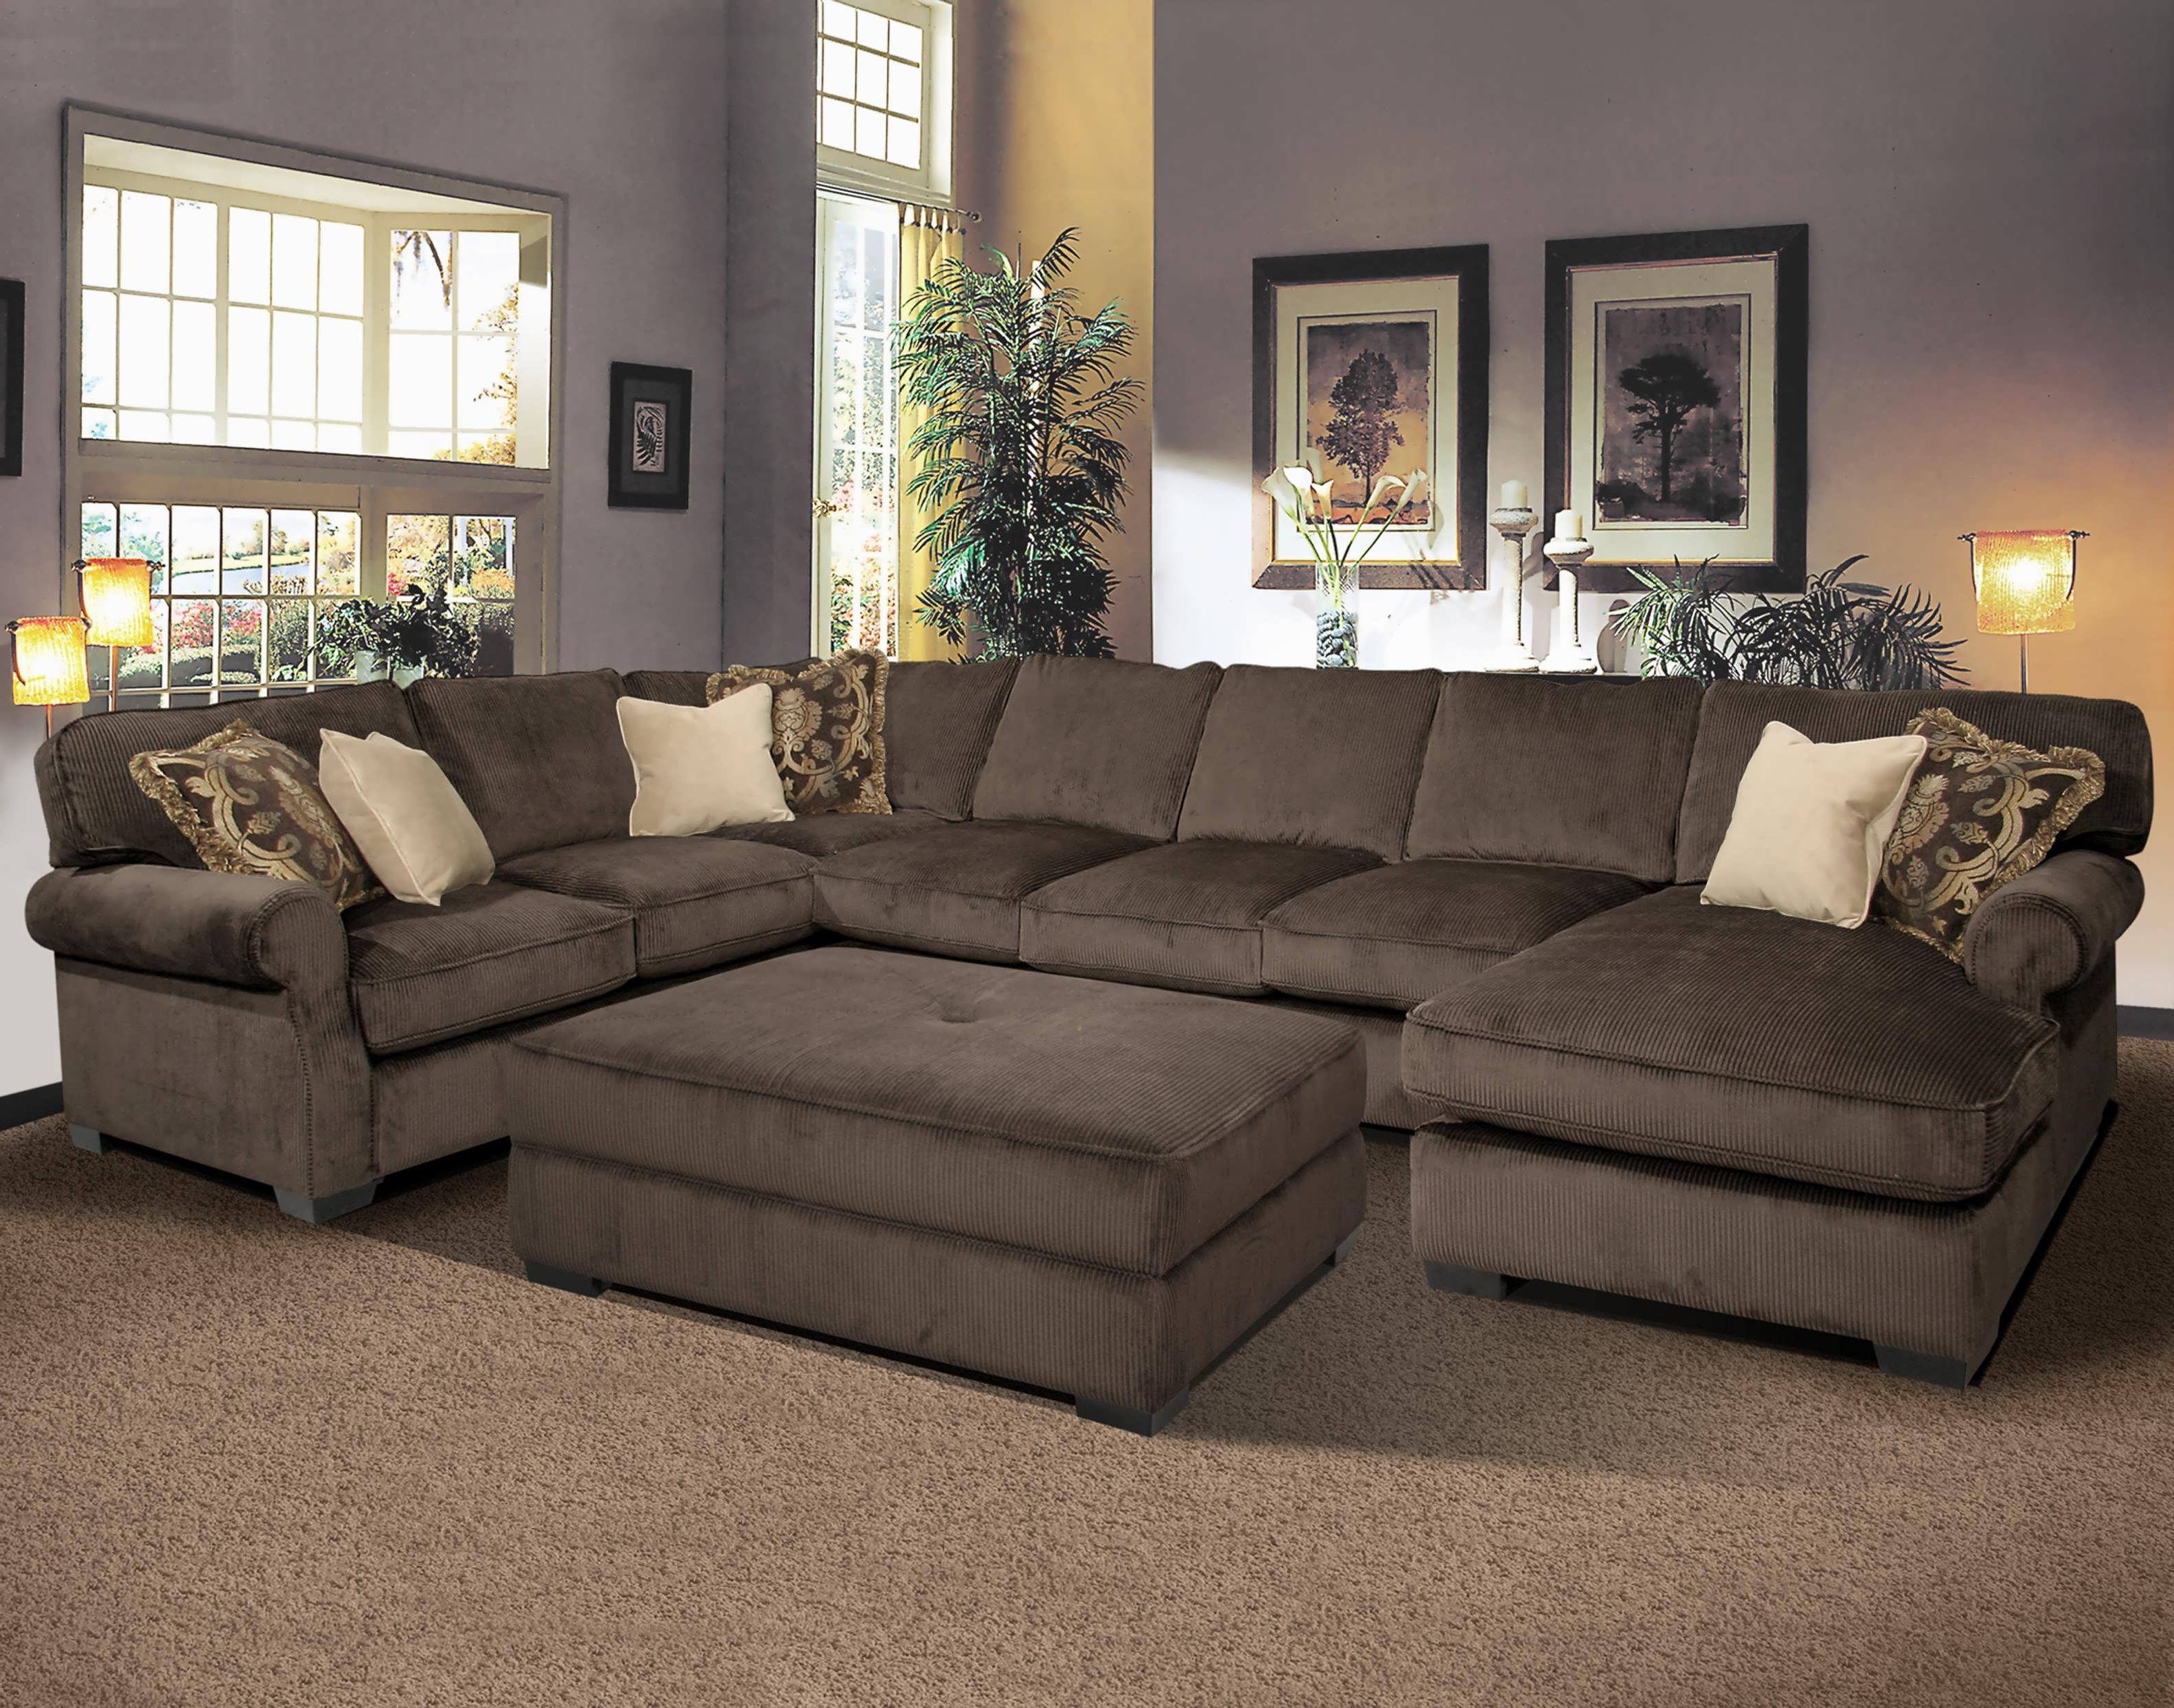 Tan Sectionals With Chaise For Recent Sofa : Chaise Sofa Tan Sectional Oversized Sectional Sofa Discount (View 13 of 15)